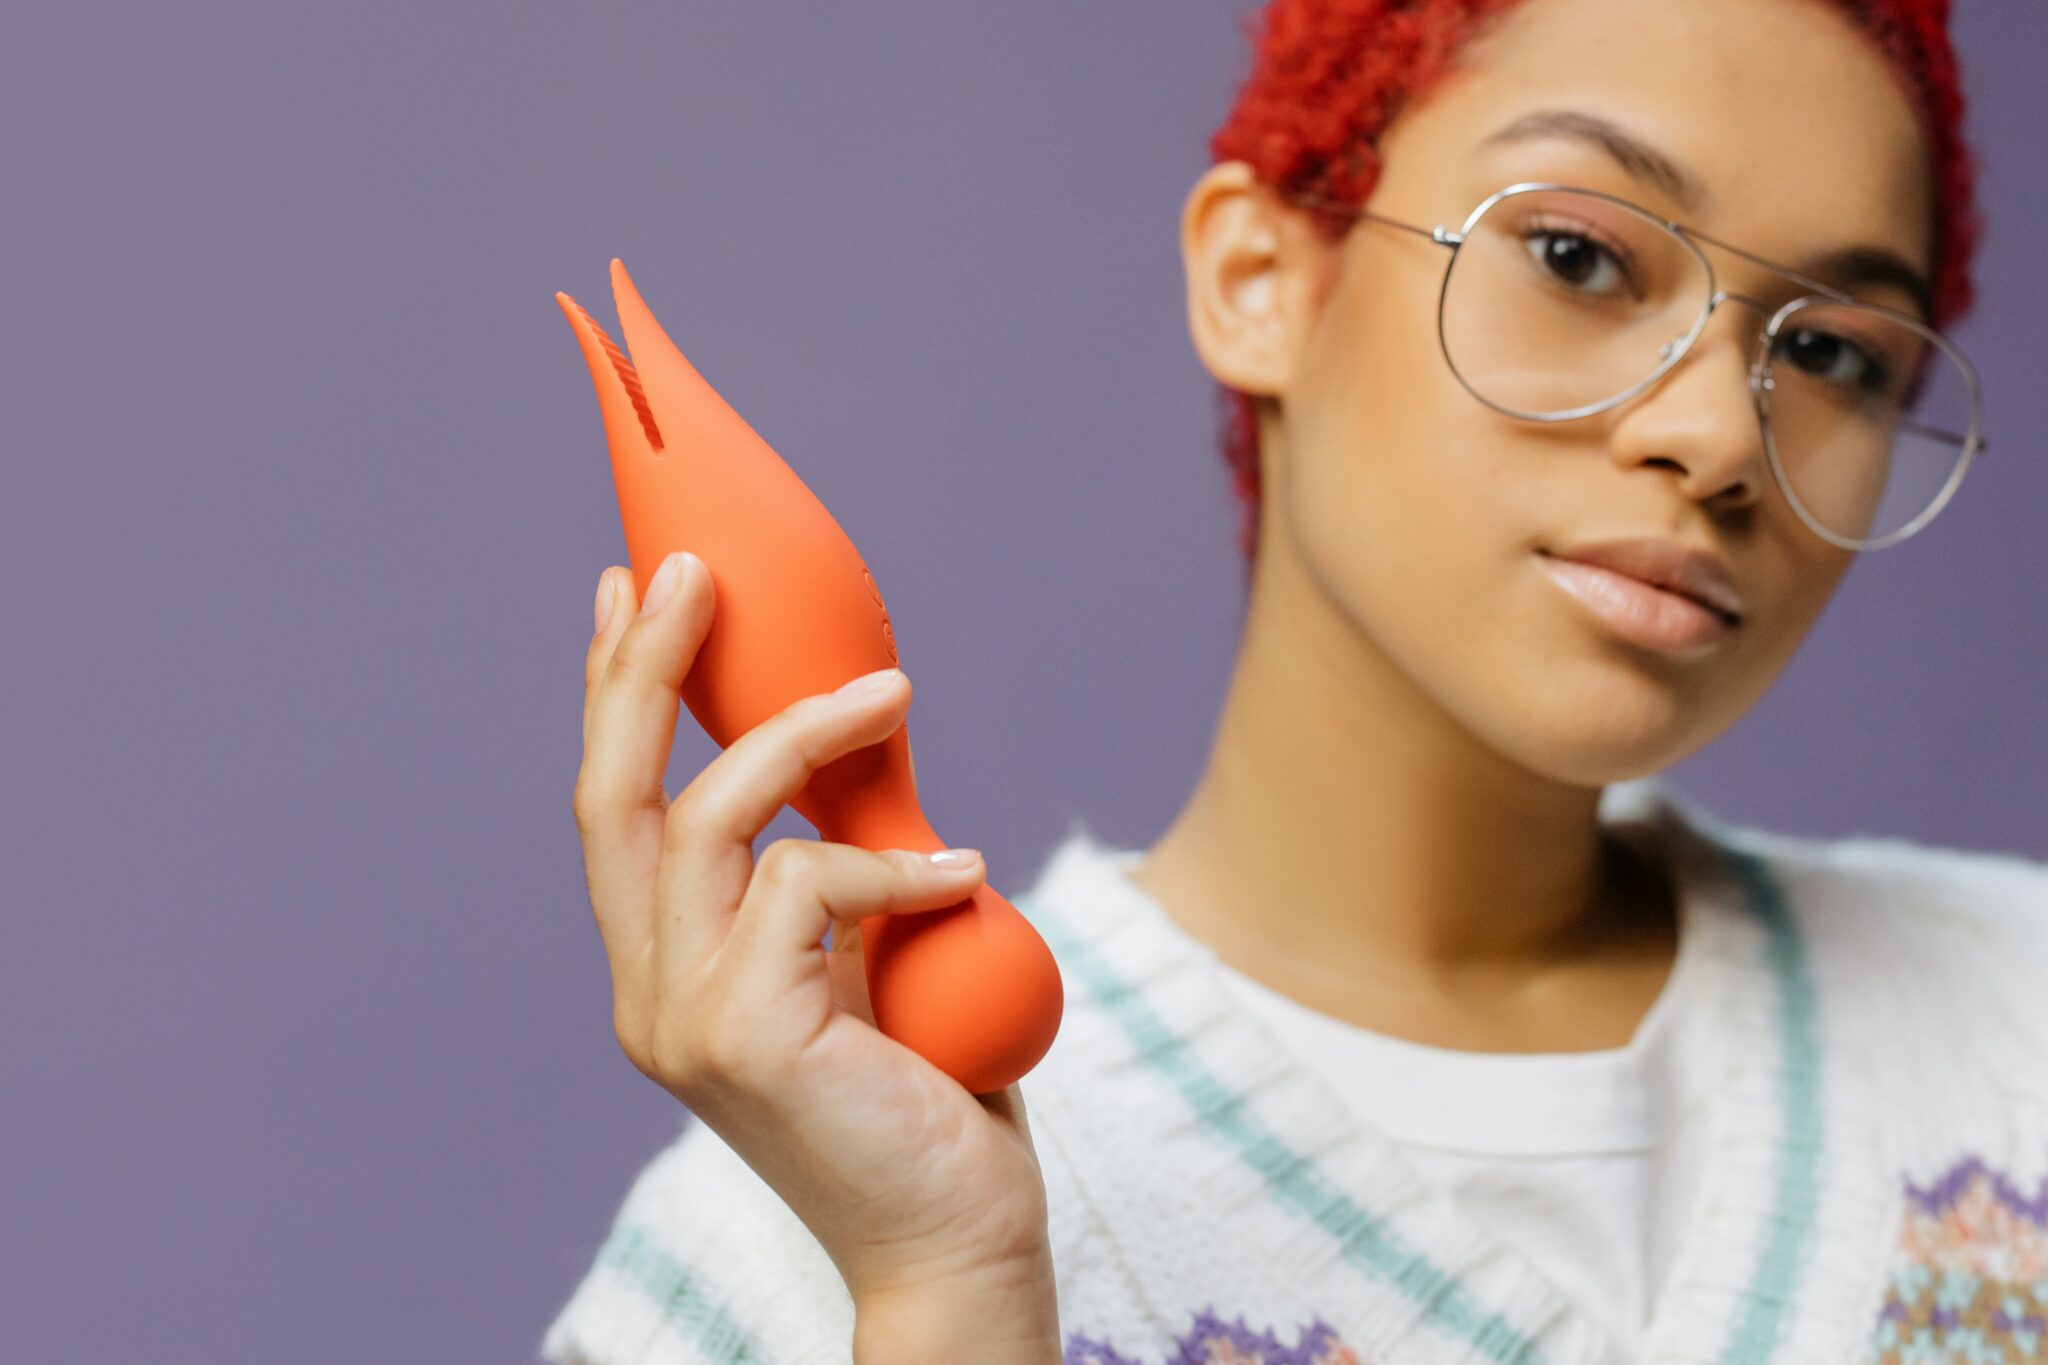 A woman holding an orange female sex toy.